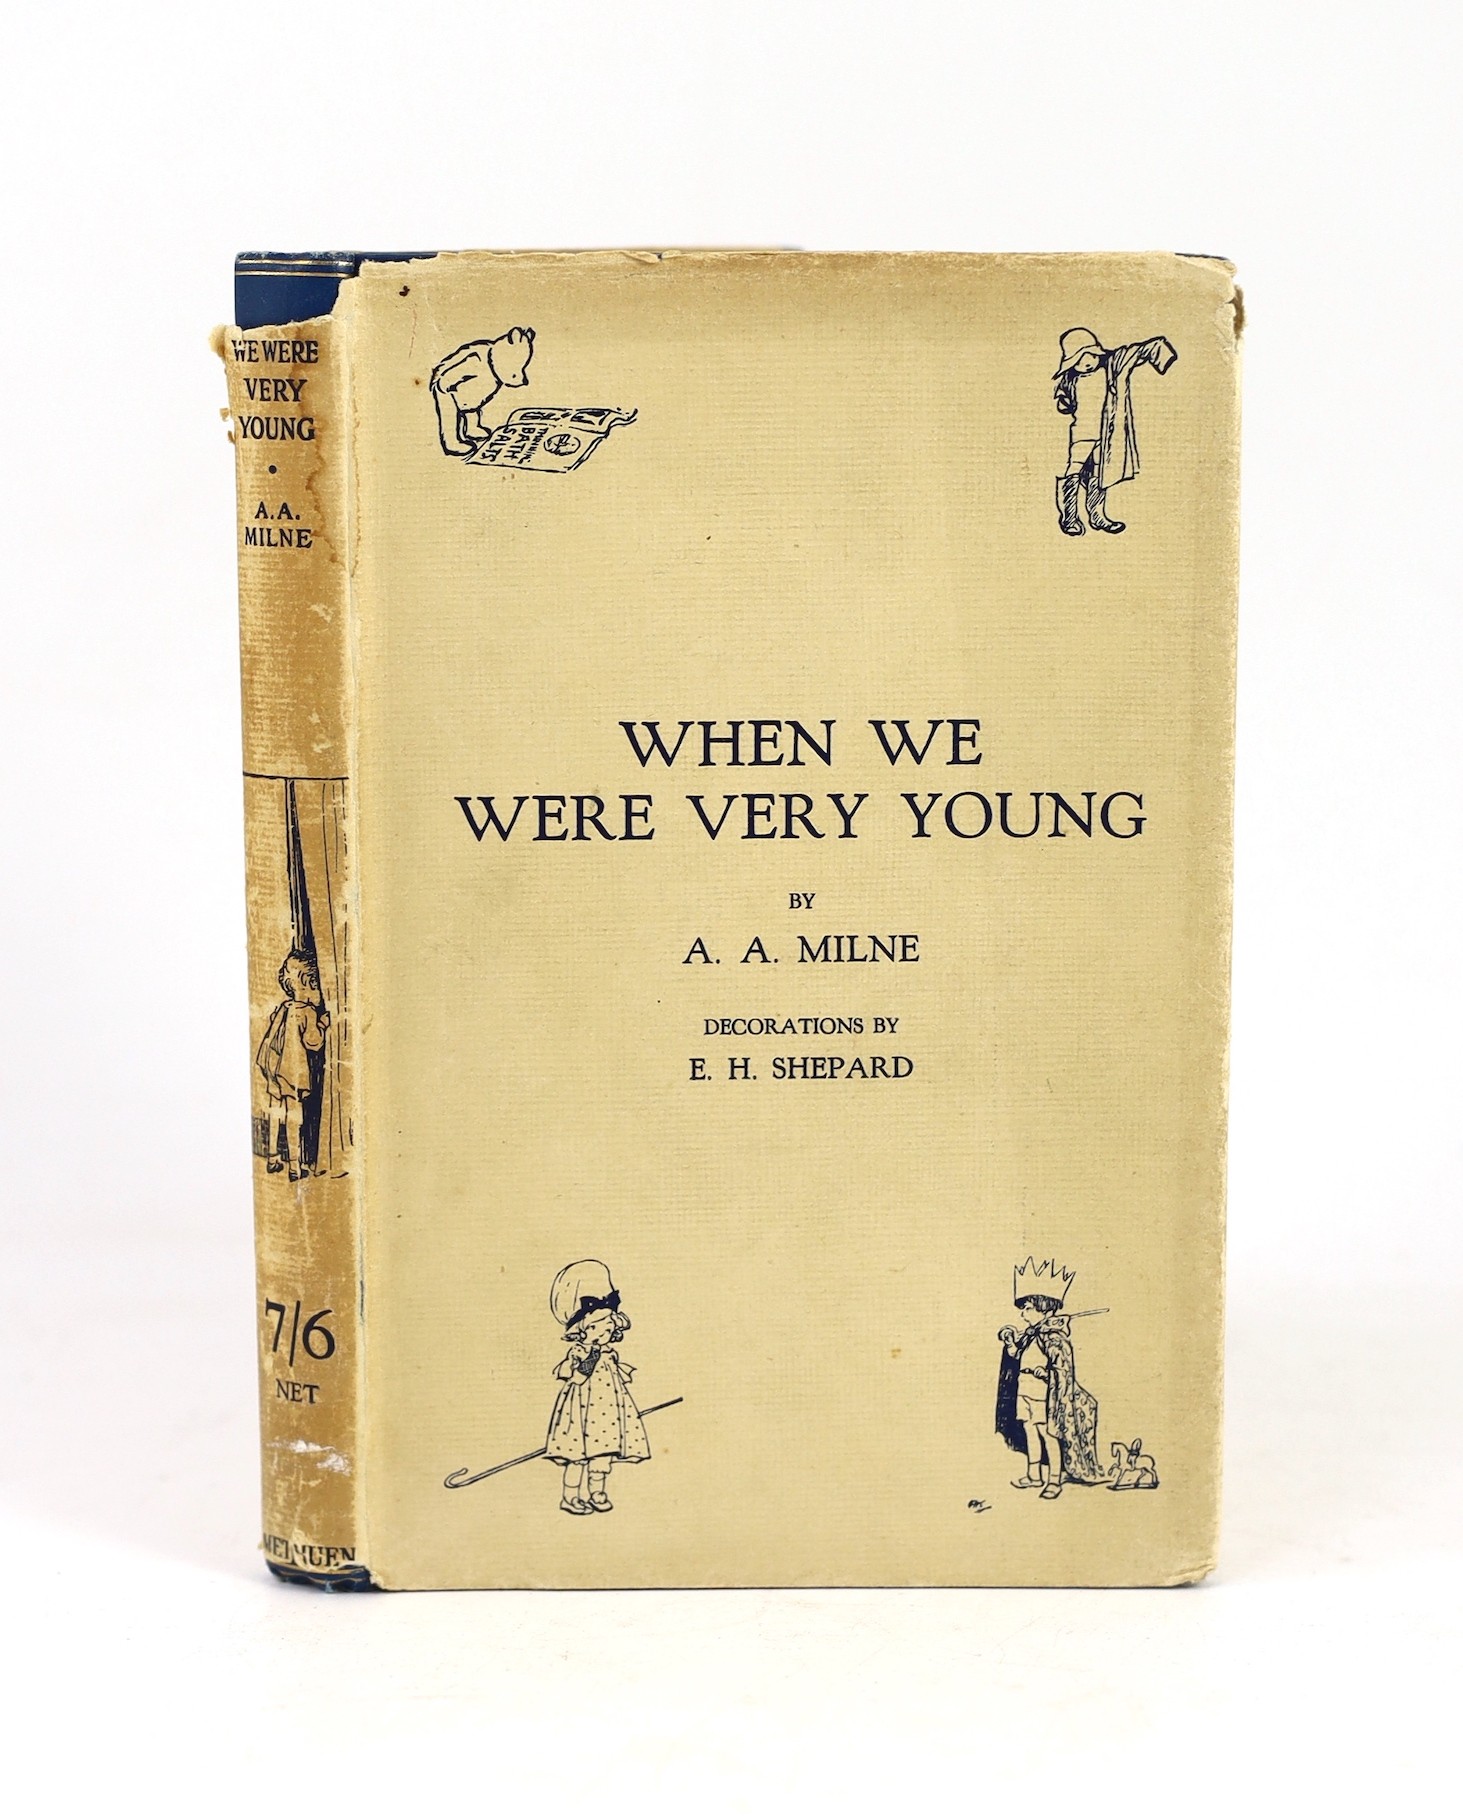 Milne, A.A - When We Were Very Young, 1st edition, 1st printing, second state with ix to foot of contents page, illustrated by Ernest Shepard, original blue pictorial cloth gilt stamped, with d/j, ownership inscription (